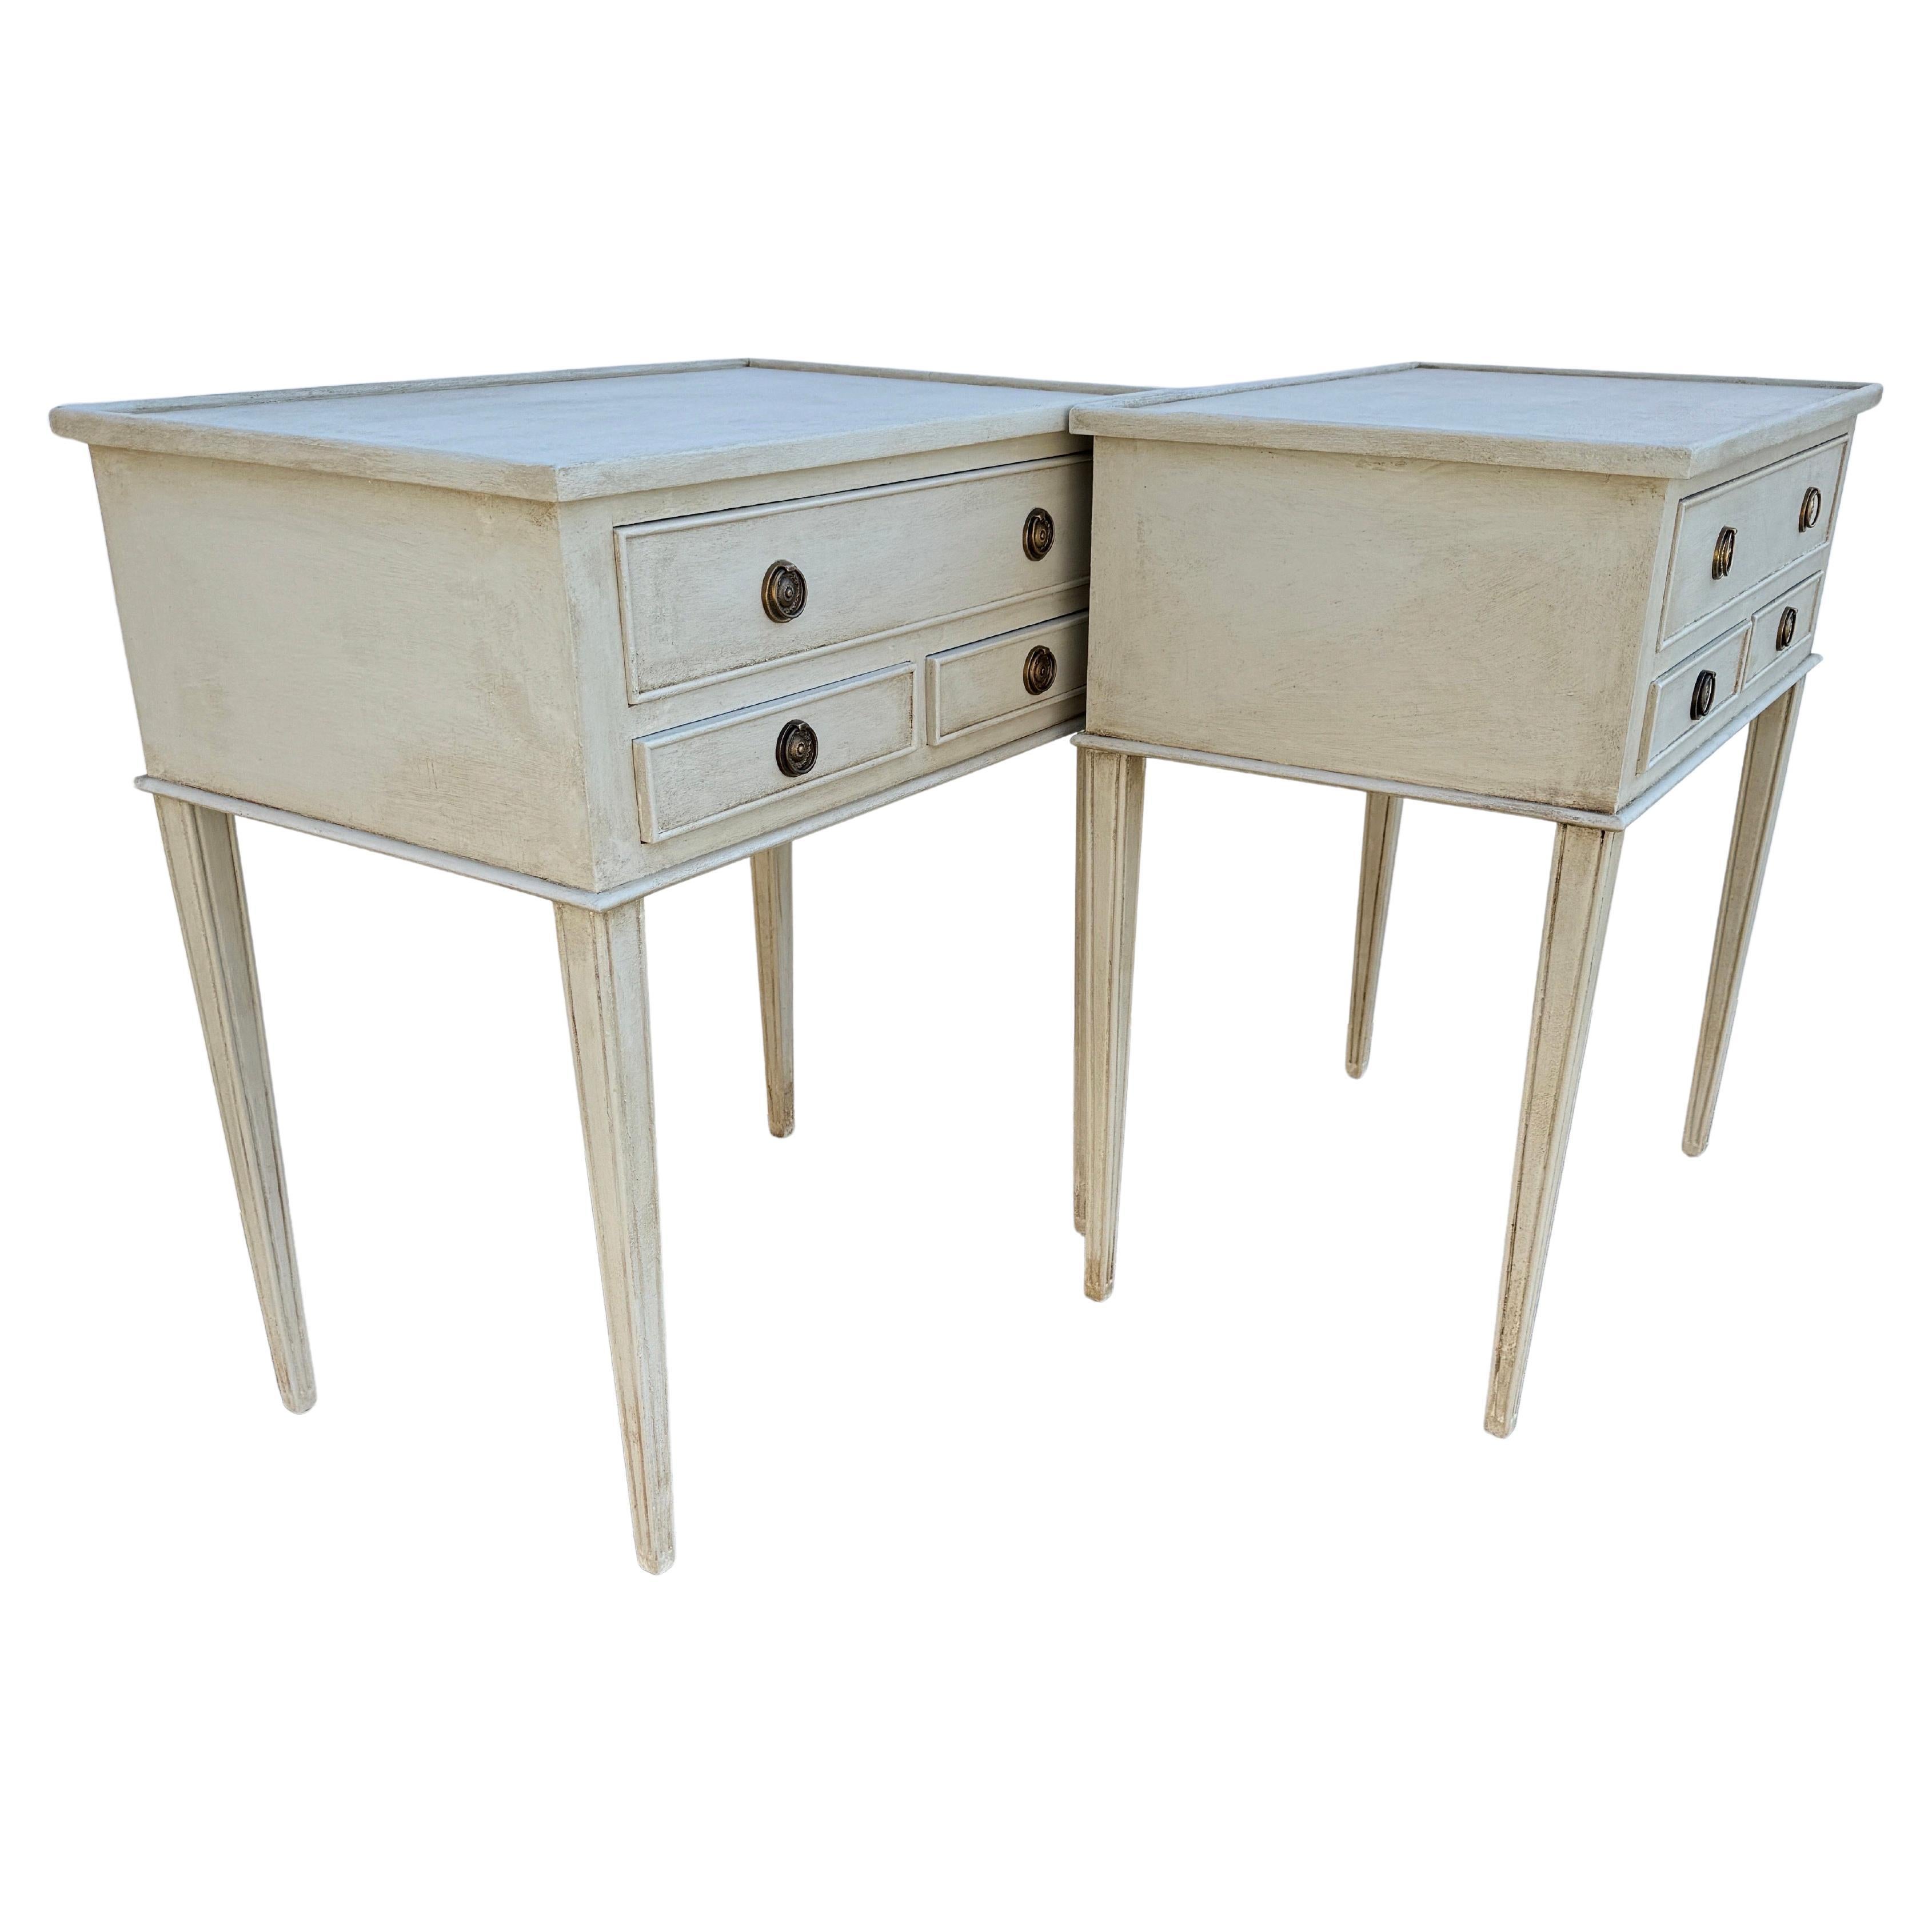 Swedish Gustavian Style 3 Drawer Side Tables Bedside, A Pair

These Swedish style three drawer hand painted neutral toned bedside tables have been constructed from solid wood. Classic details on this set including a hand-applied finish and feature